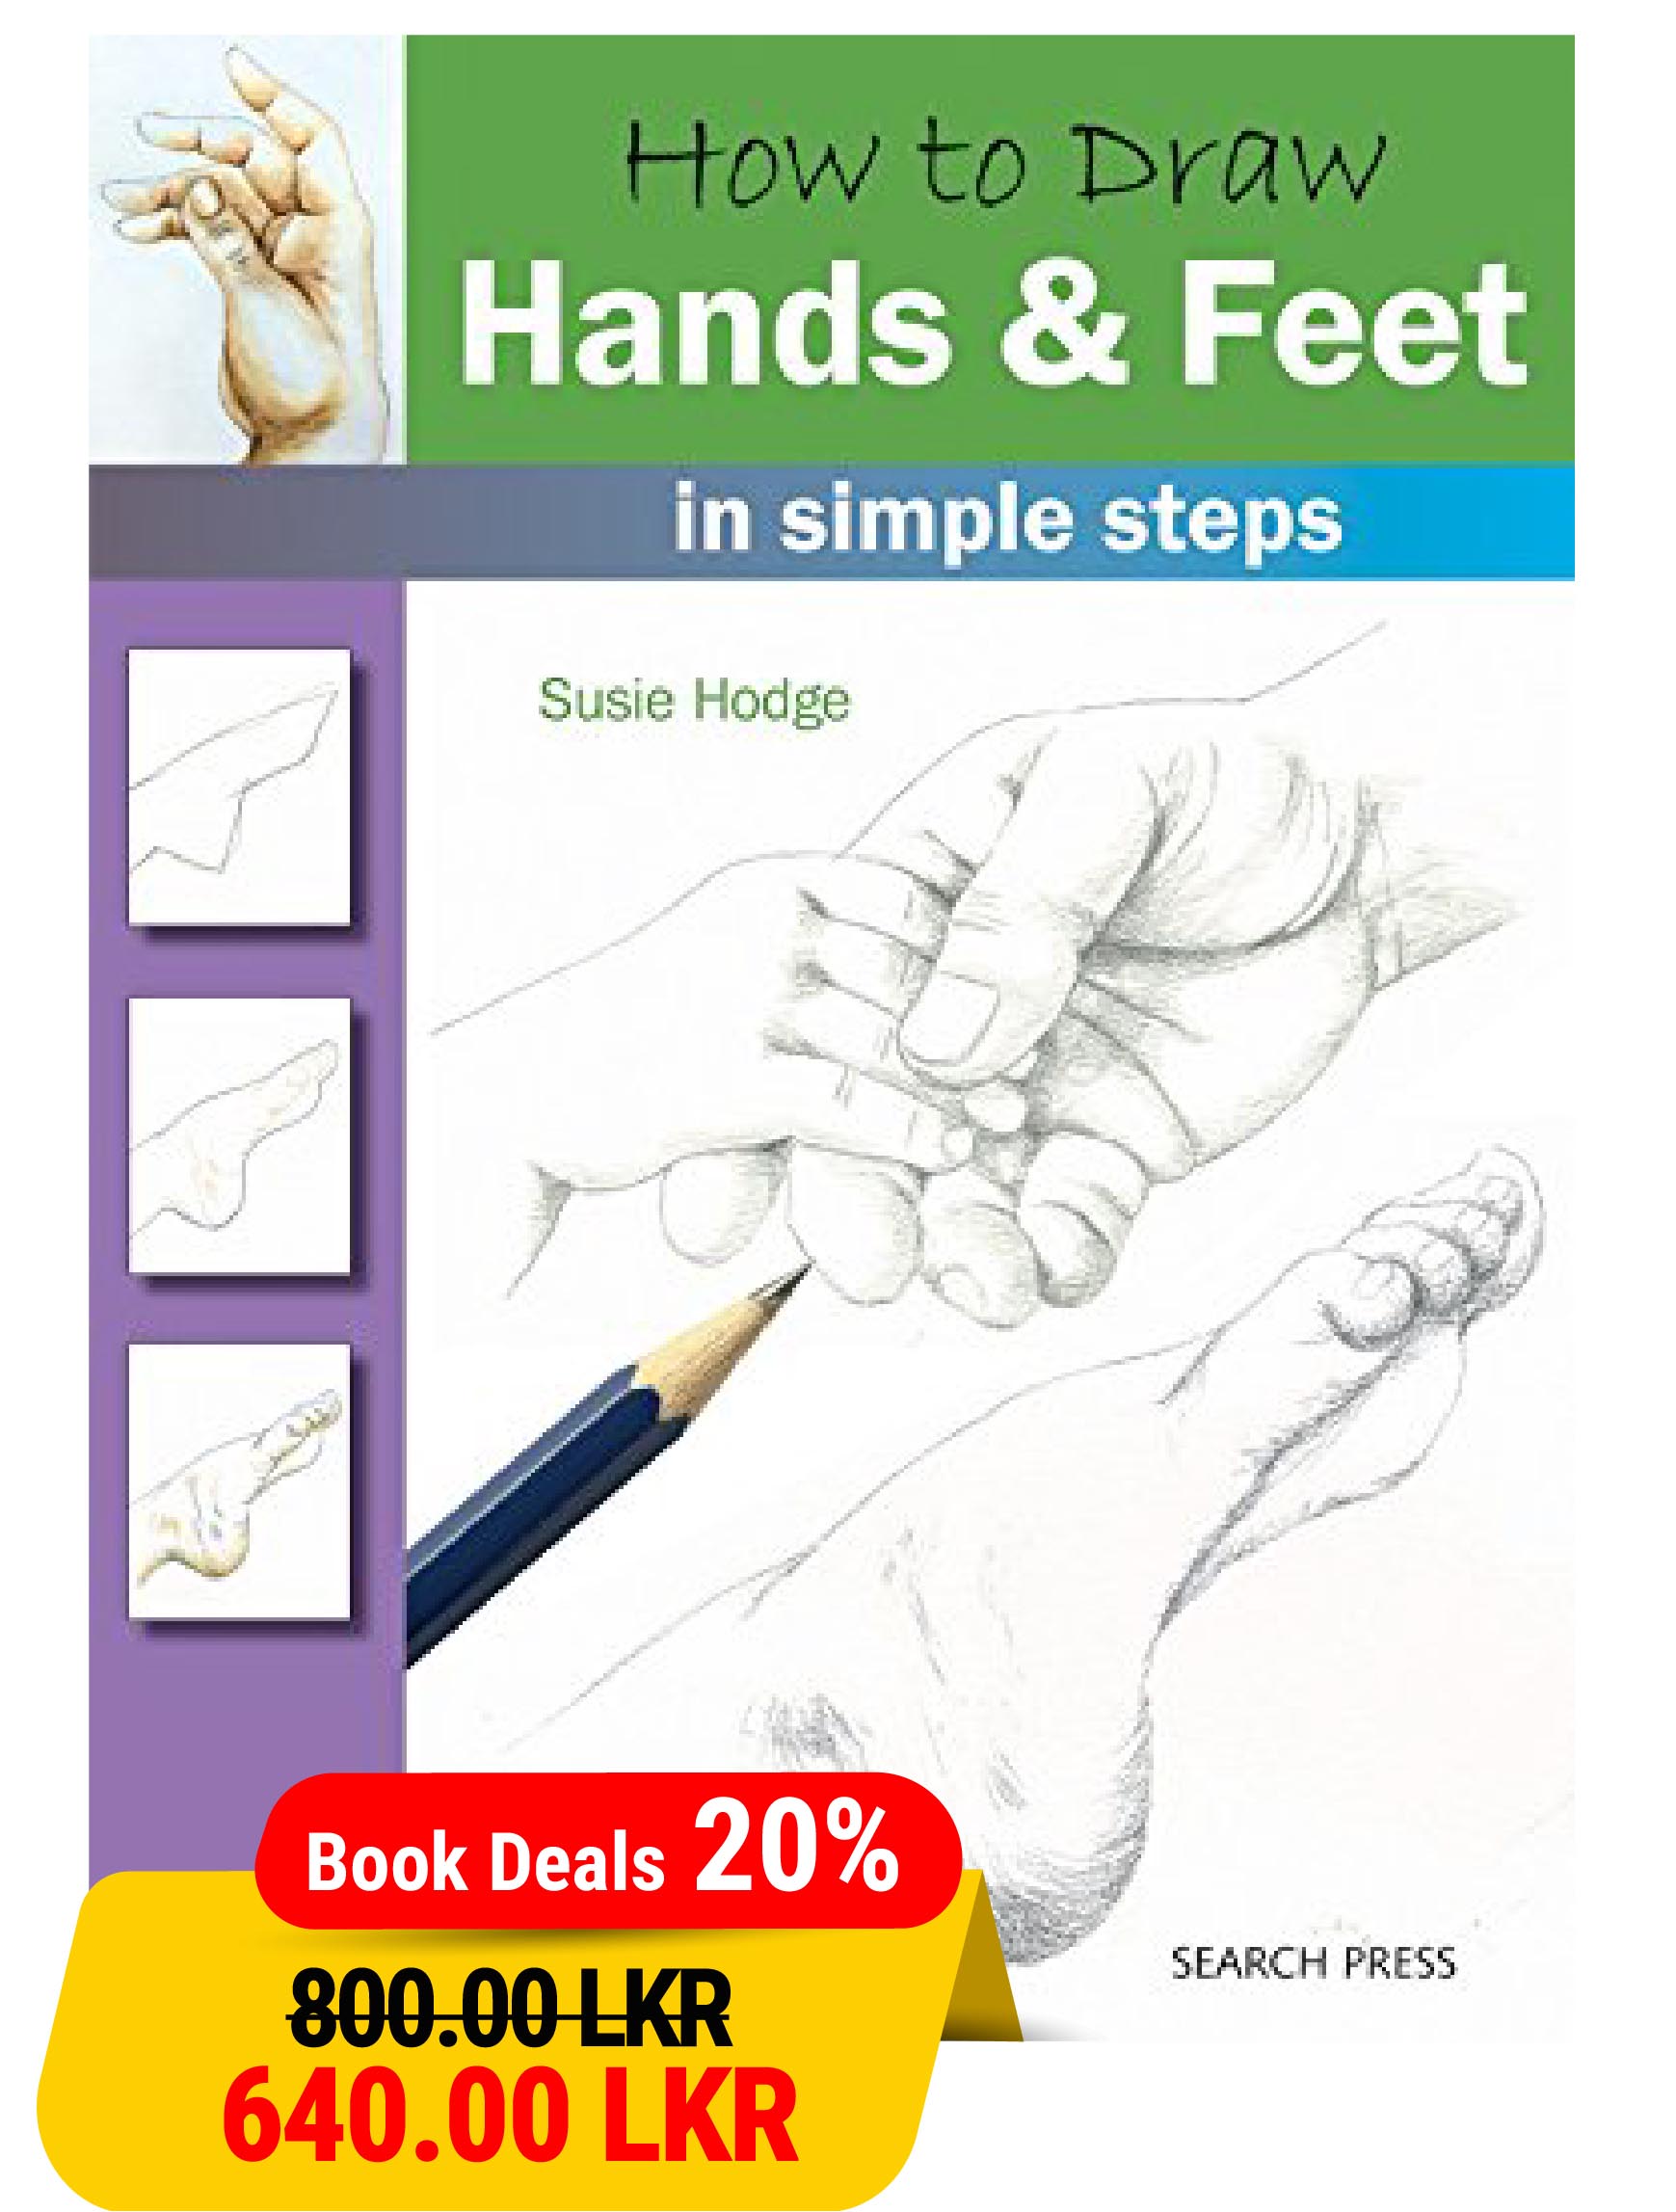 How to Draw Hands and Feet in Simple Steps